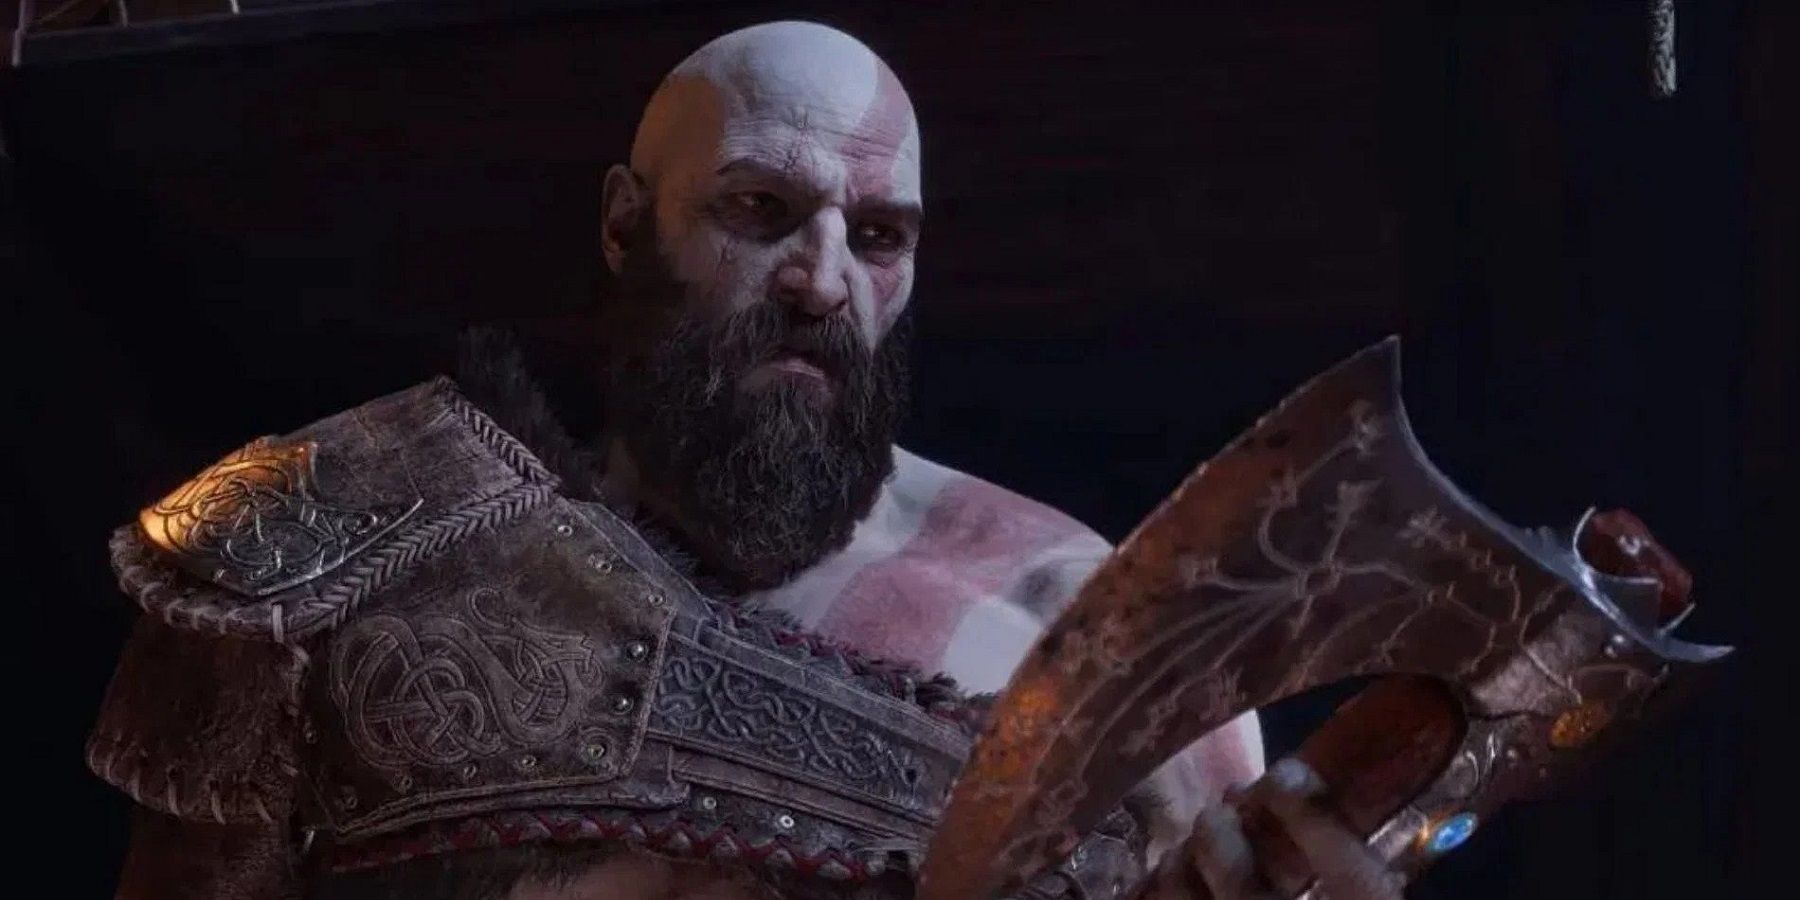 God of War Ragnarok Fan Makes 1:1 Scale Real-Life Leviathan
Axe